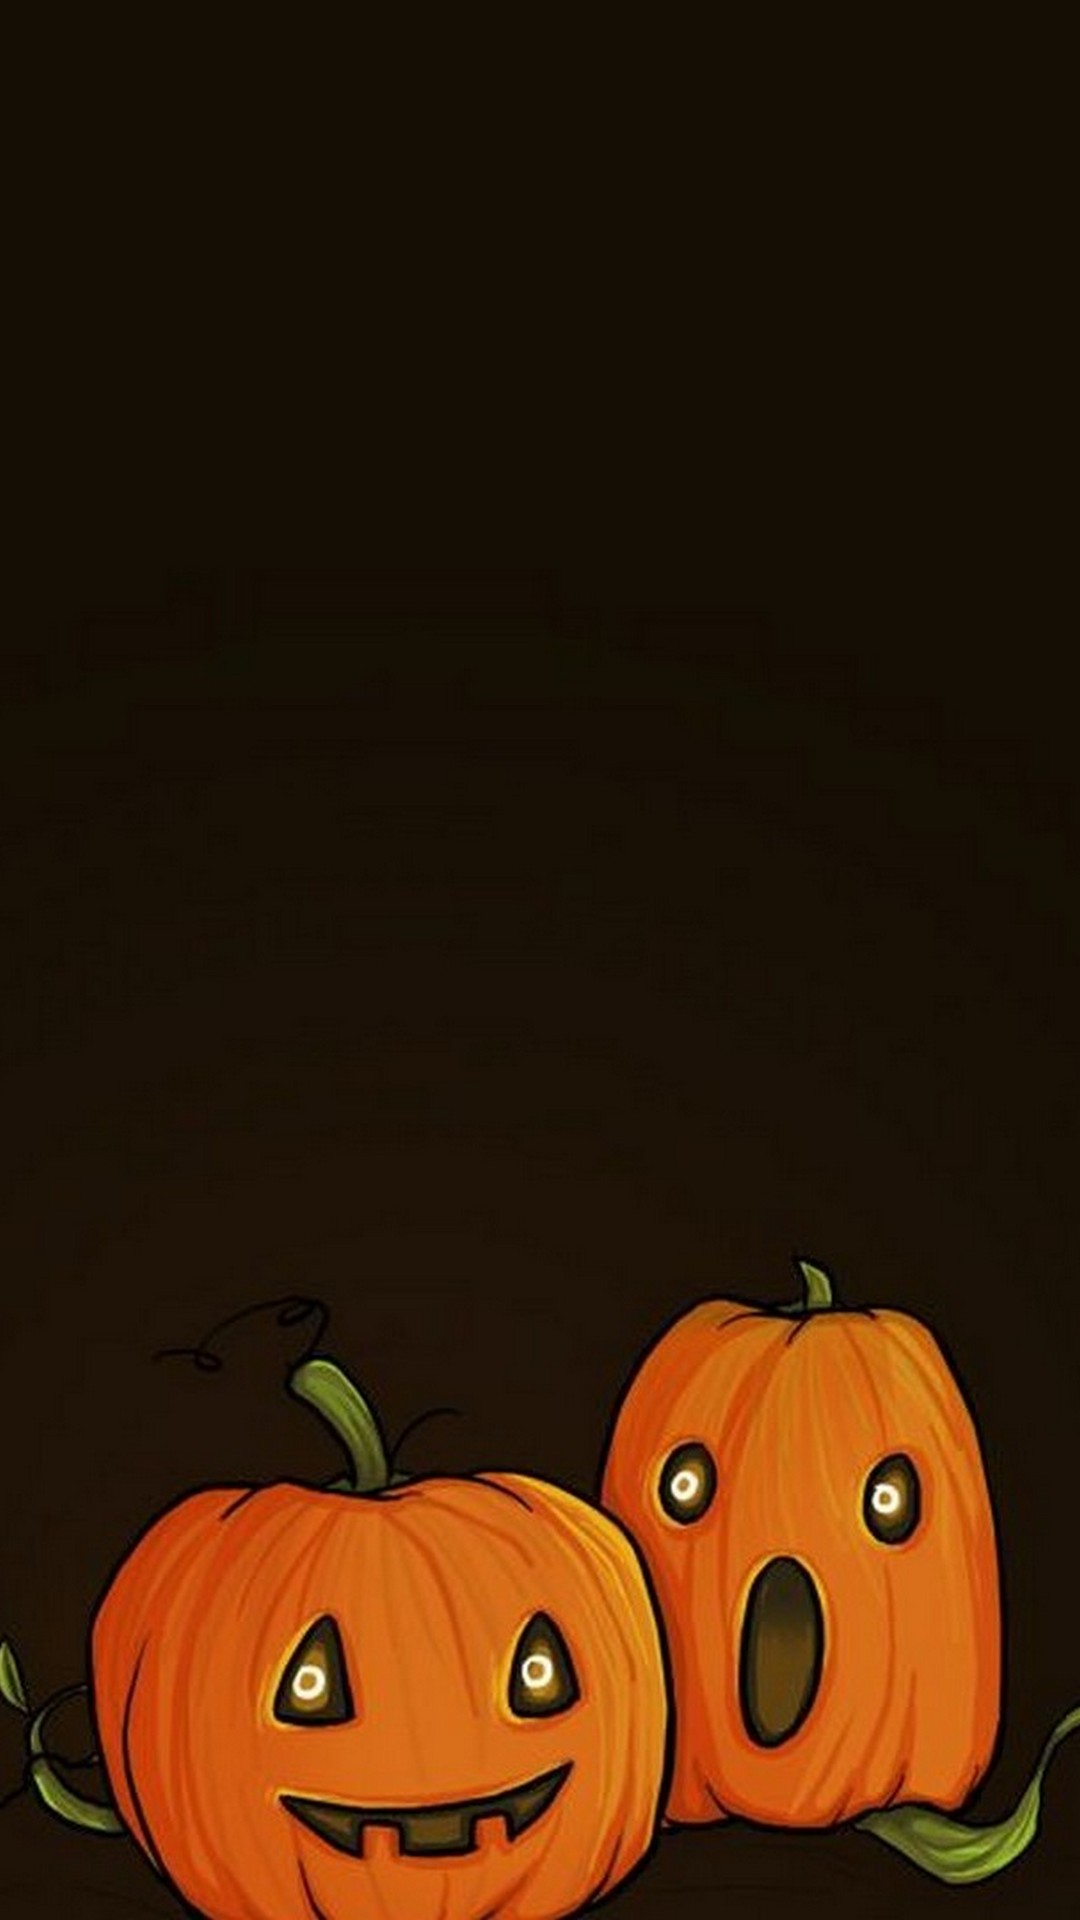 Cute Halloween Wallpaper For Phone HD with high-resolution 1080x1920 pixel. Download all Mobile Wallpapers and Use them as wallpapers for your iPhone, Tablet, iPad, Android and other mobile devices